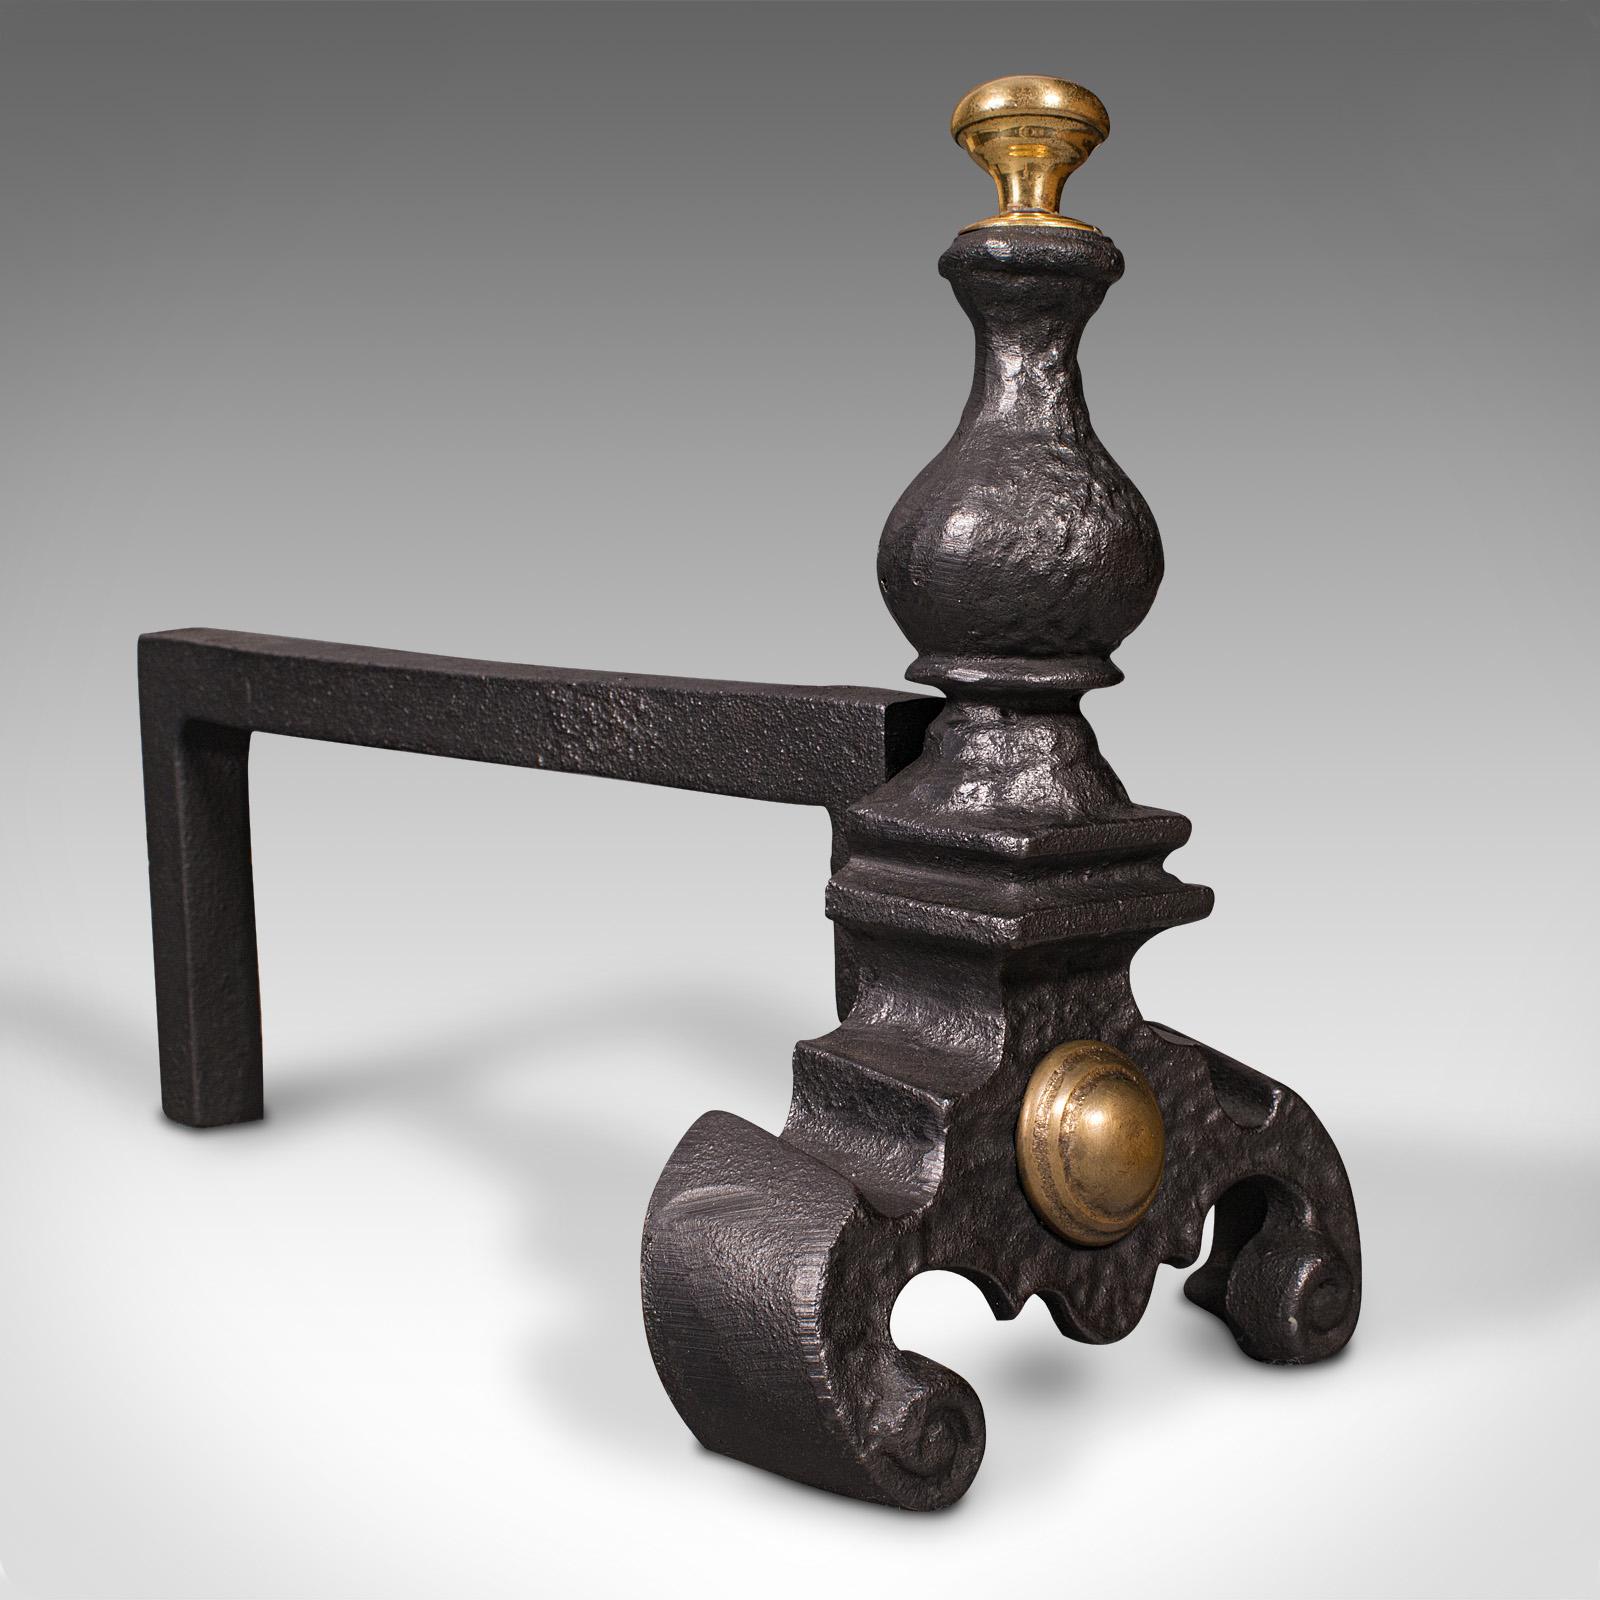 Pair Of Antique Decorative Fire Rests, English Fireside Andiron, Victorian, 1850 For Sale 1